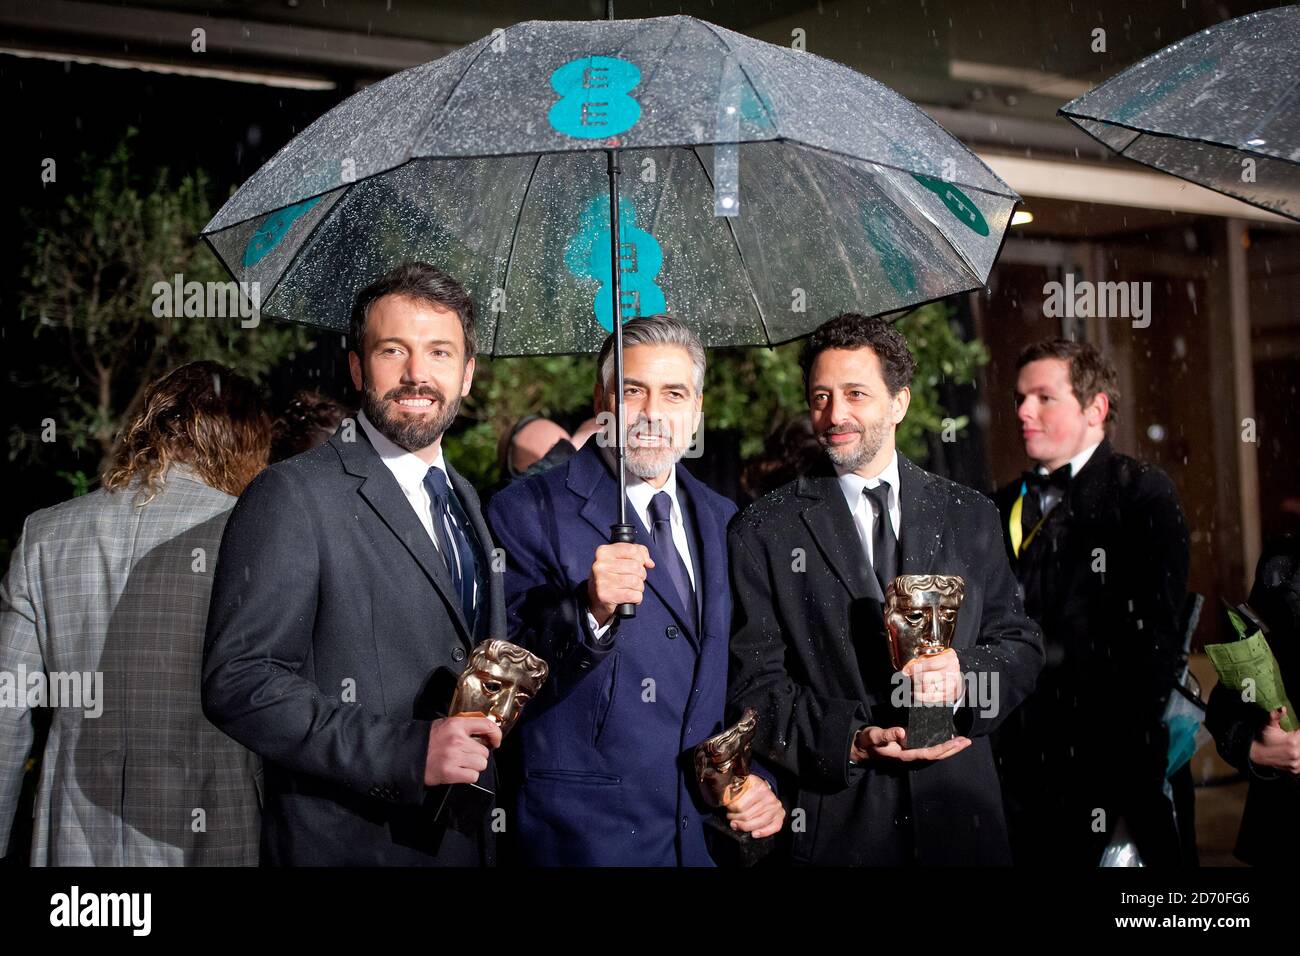 Ben Affleck, George Clooney and Grant Heslov attending the 2013 Bafta Film Awards after party, at the Grosvenor House Hotel in central London. Stock Photo